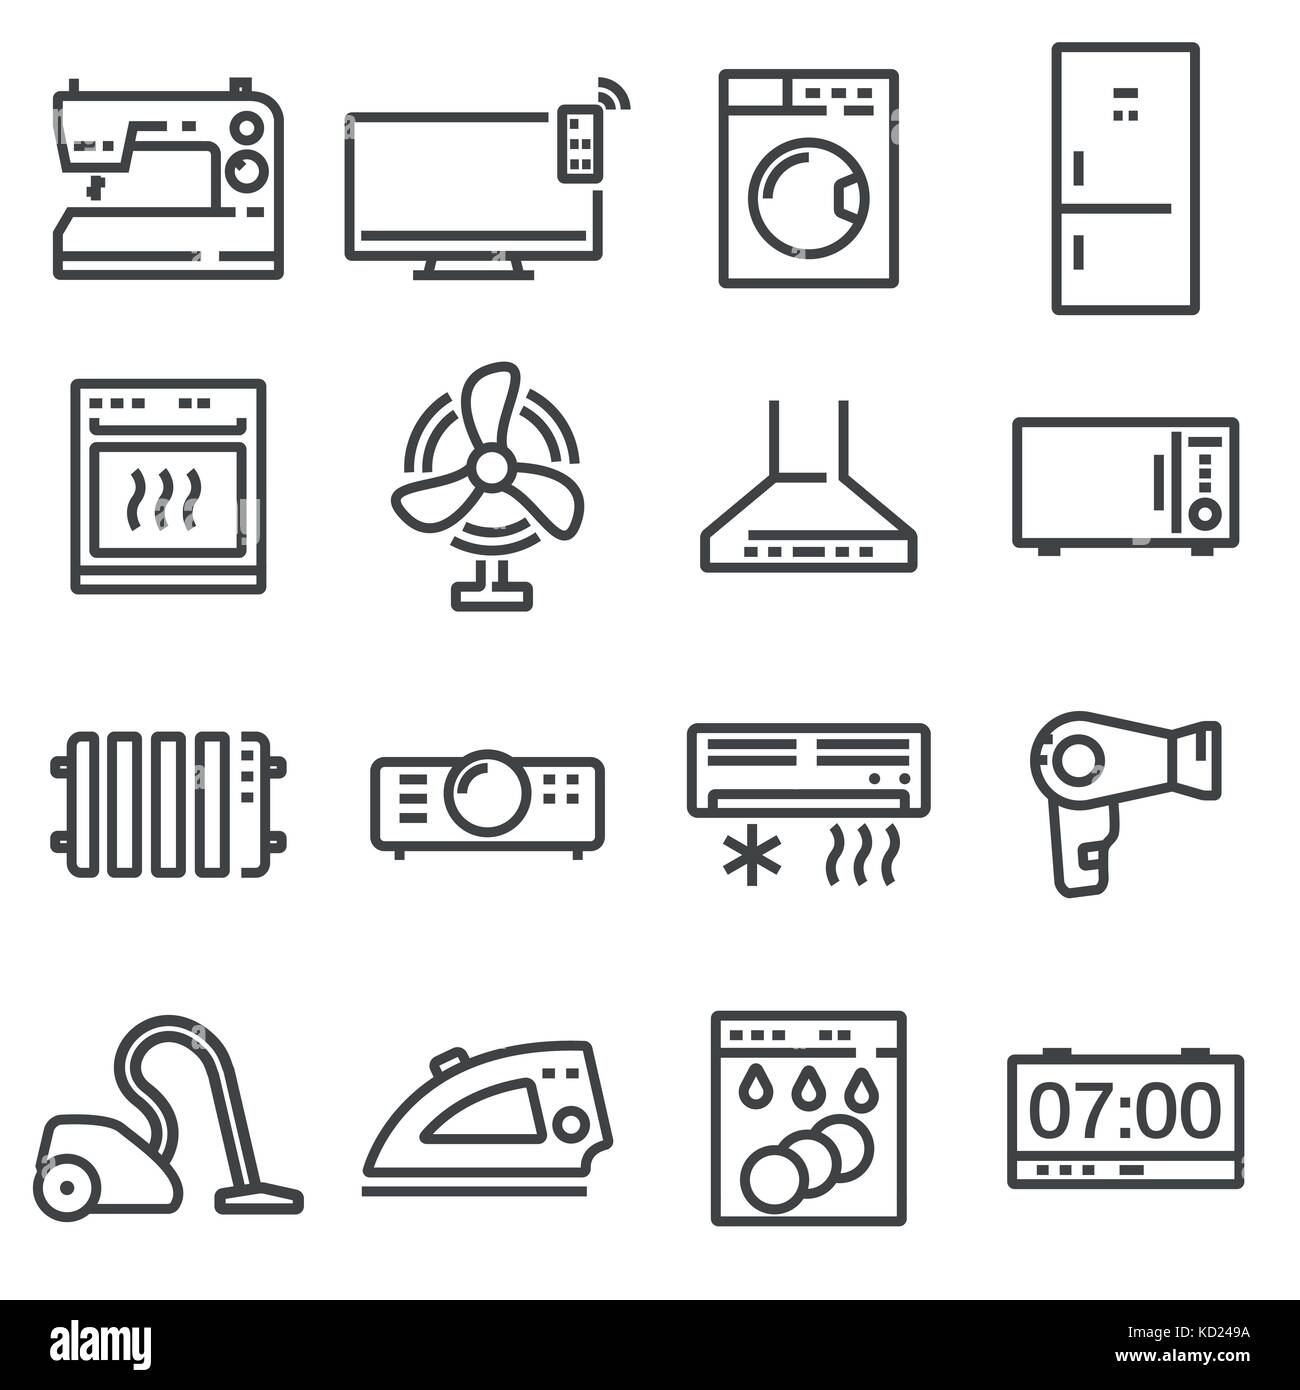 https://c8.alamy.com/comp/KD249A/vector-line-household-appliances-icons-set-on-white-background-KD249A.jpg